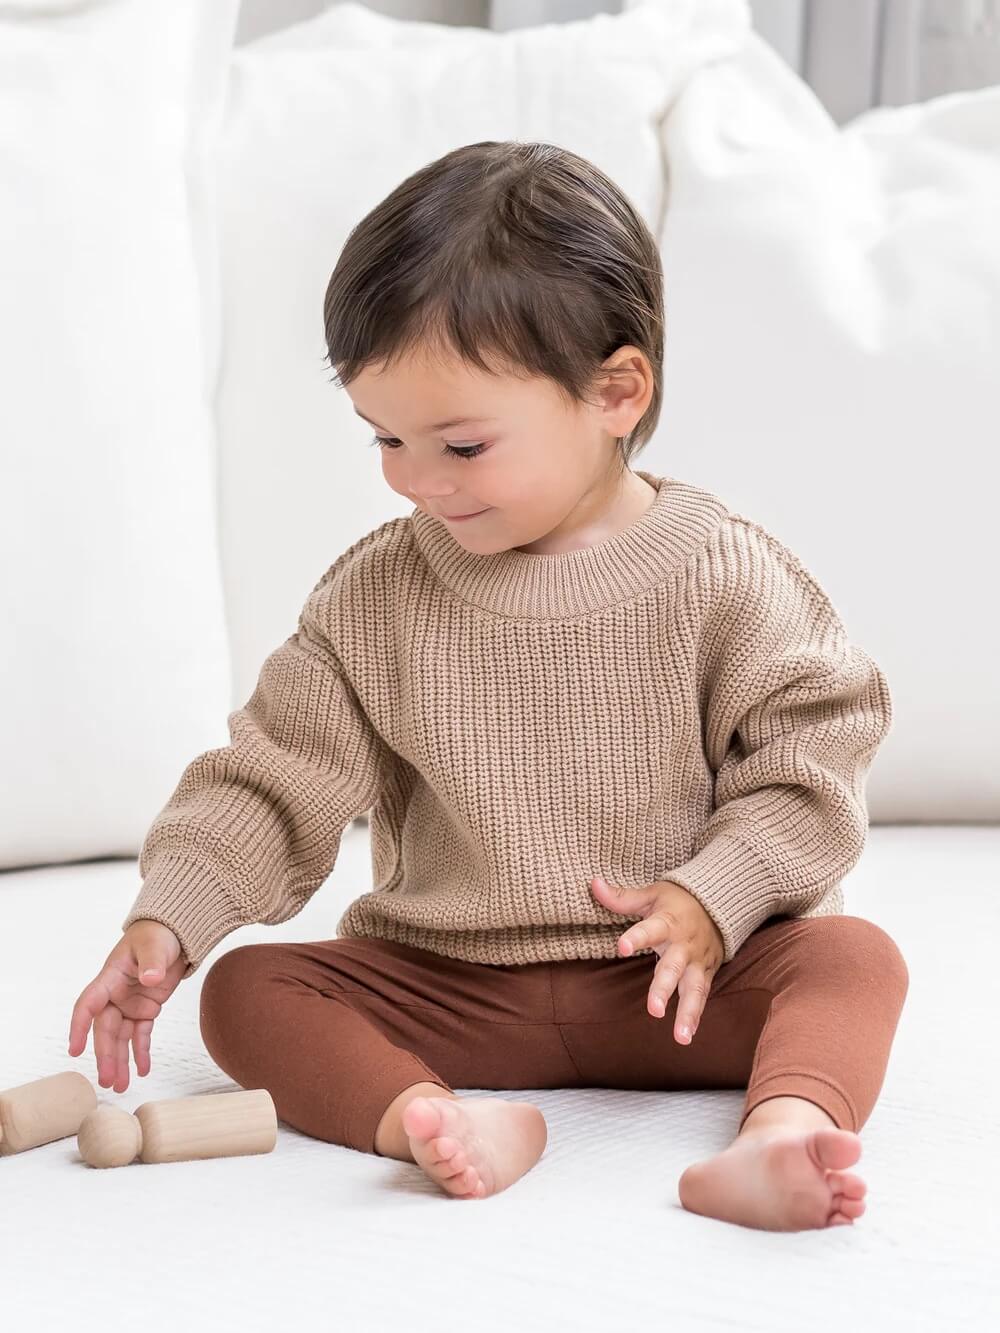 Why Choose Organic Baby Clothes?